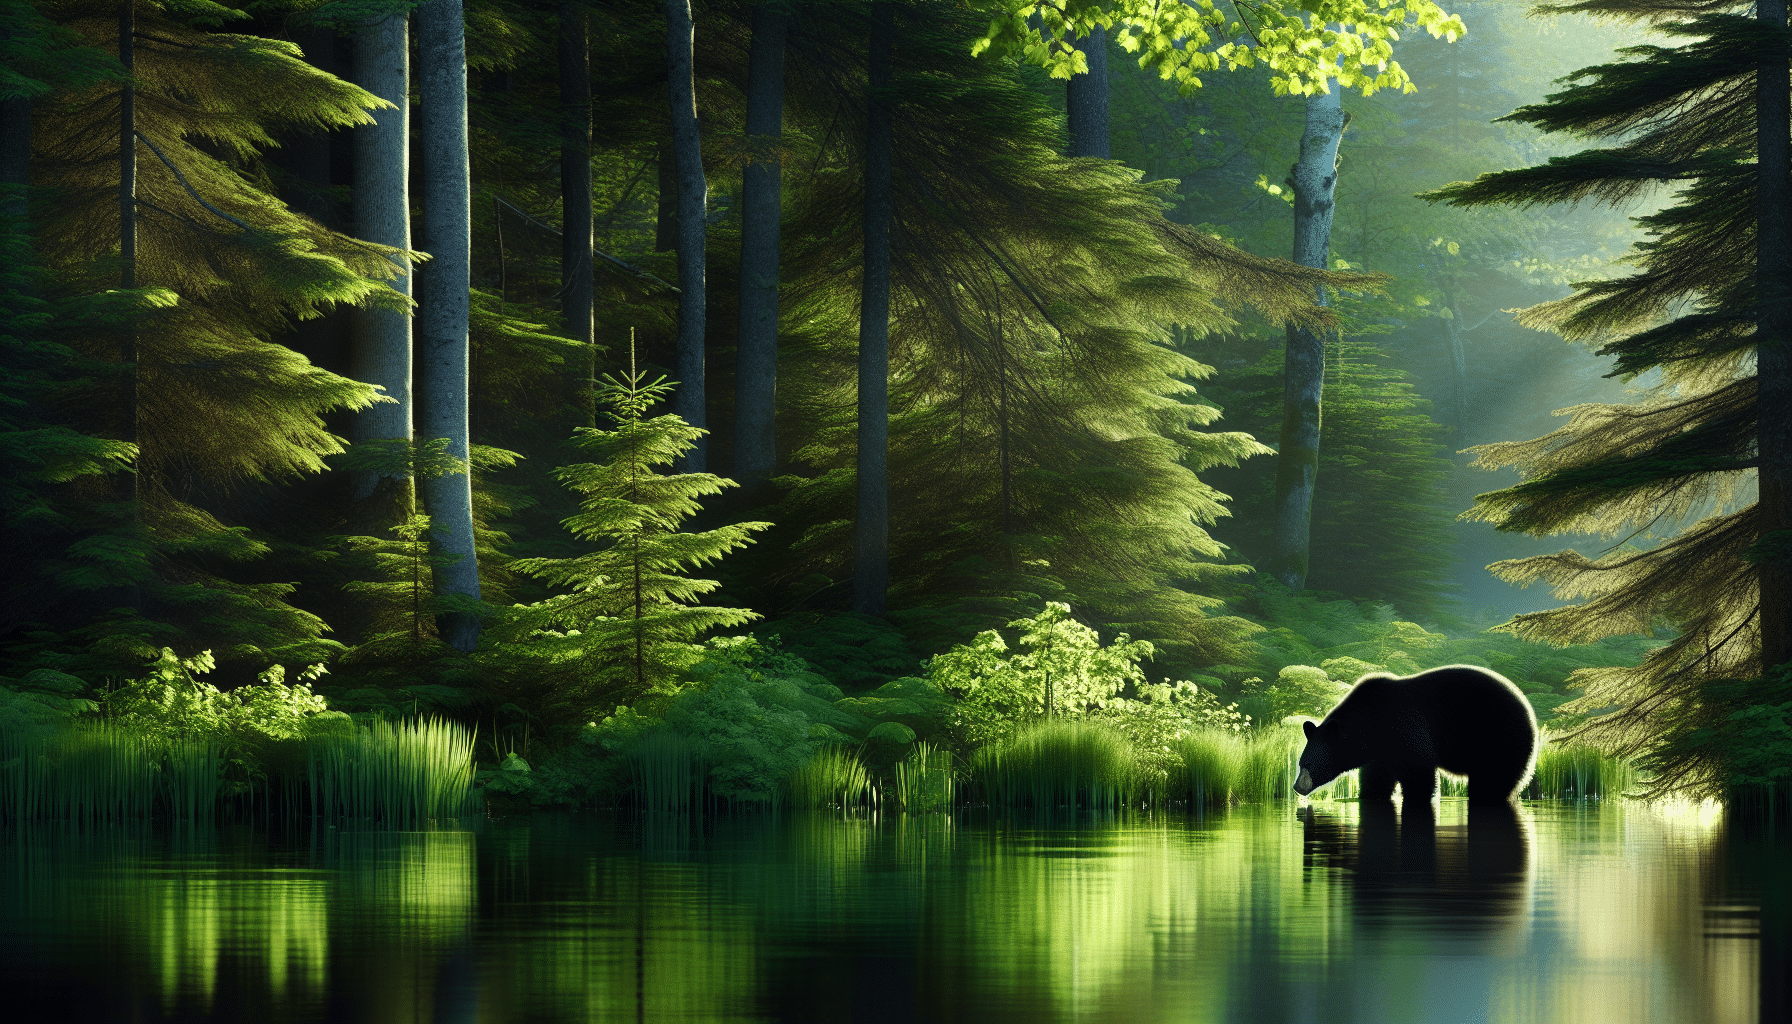 An image of dense, green forest foliage dappled with sunlight. The star of the scene is a solitary black bear, its coat gleaming smoothly in the sun. The bear stands near a body of water, drinking peacefully, its reflection seen in the placid lake. There are no human figures, text, or brand names present in this serene, natural scene.